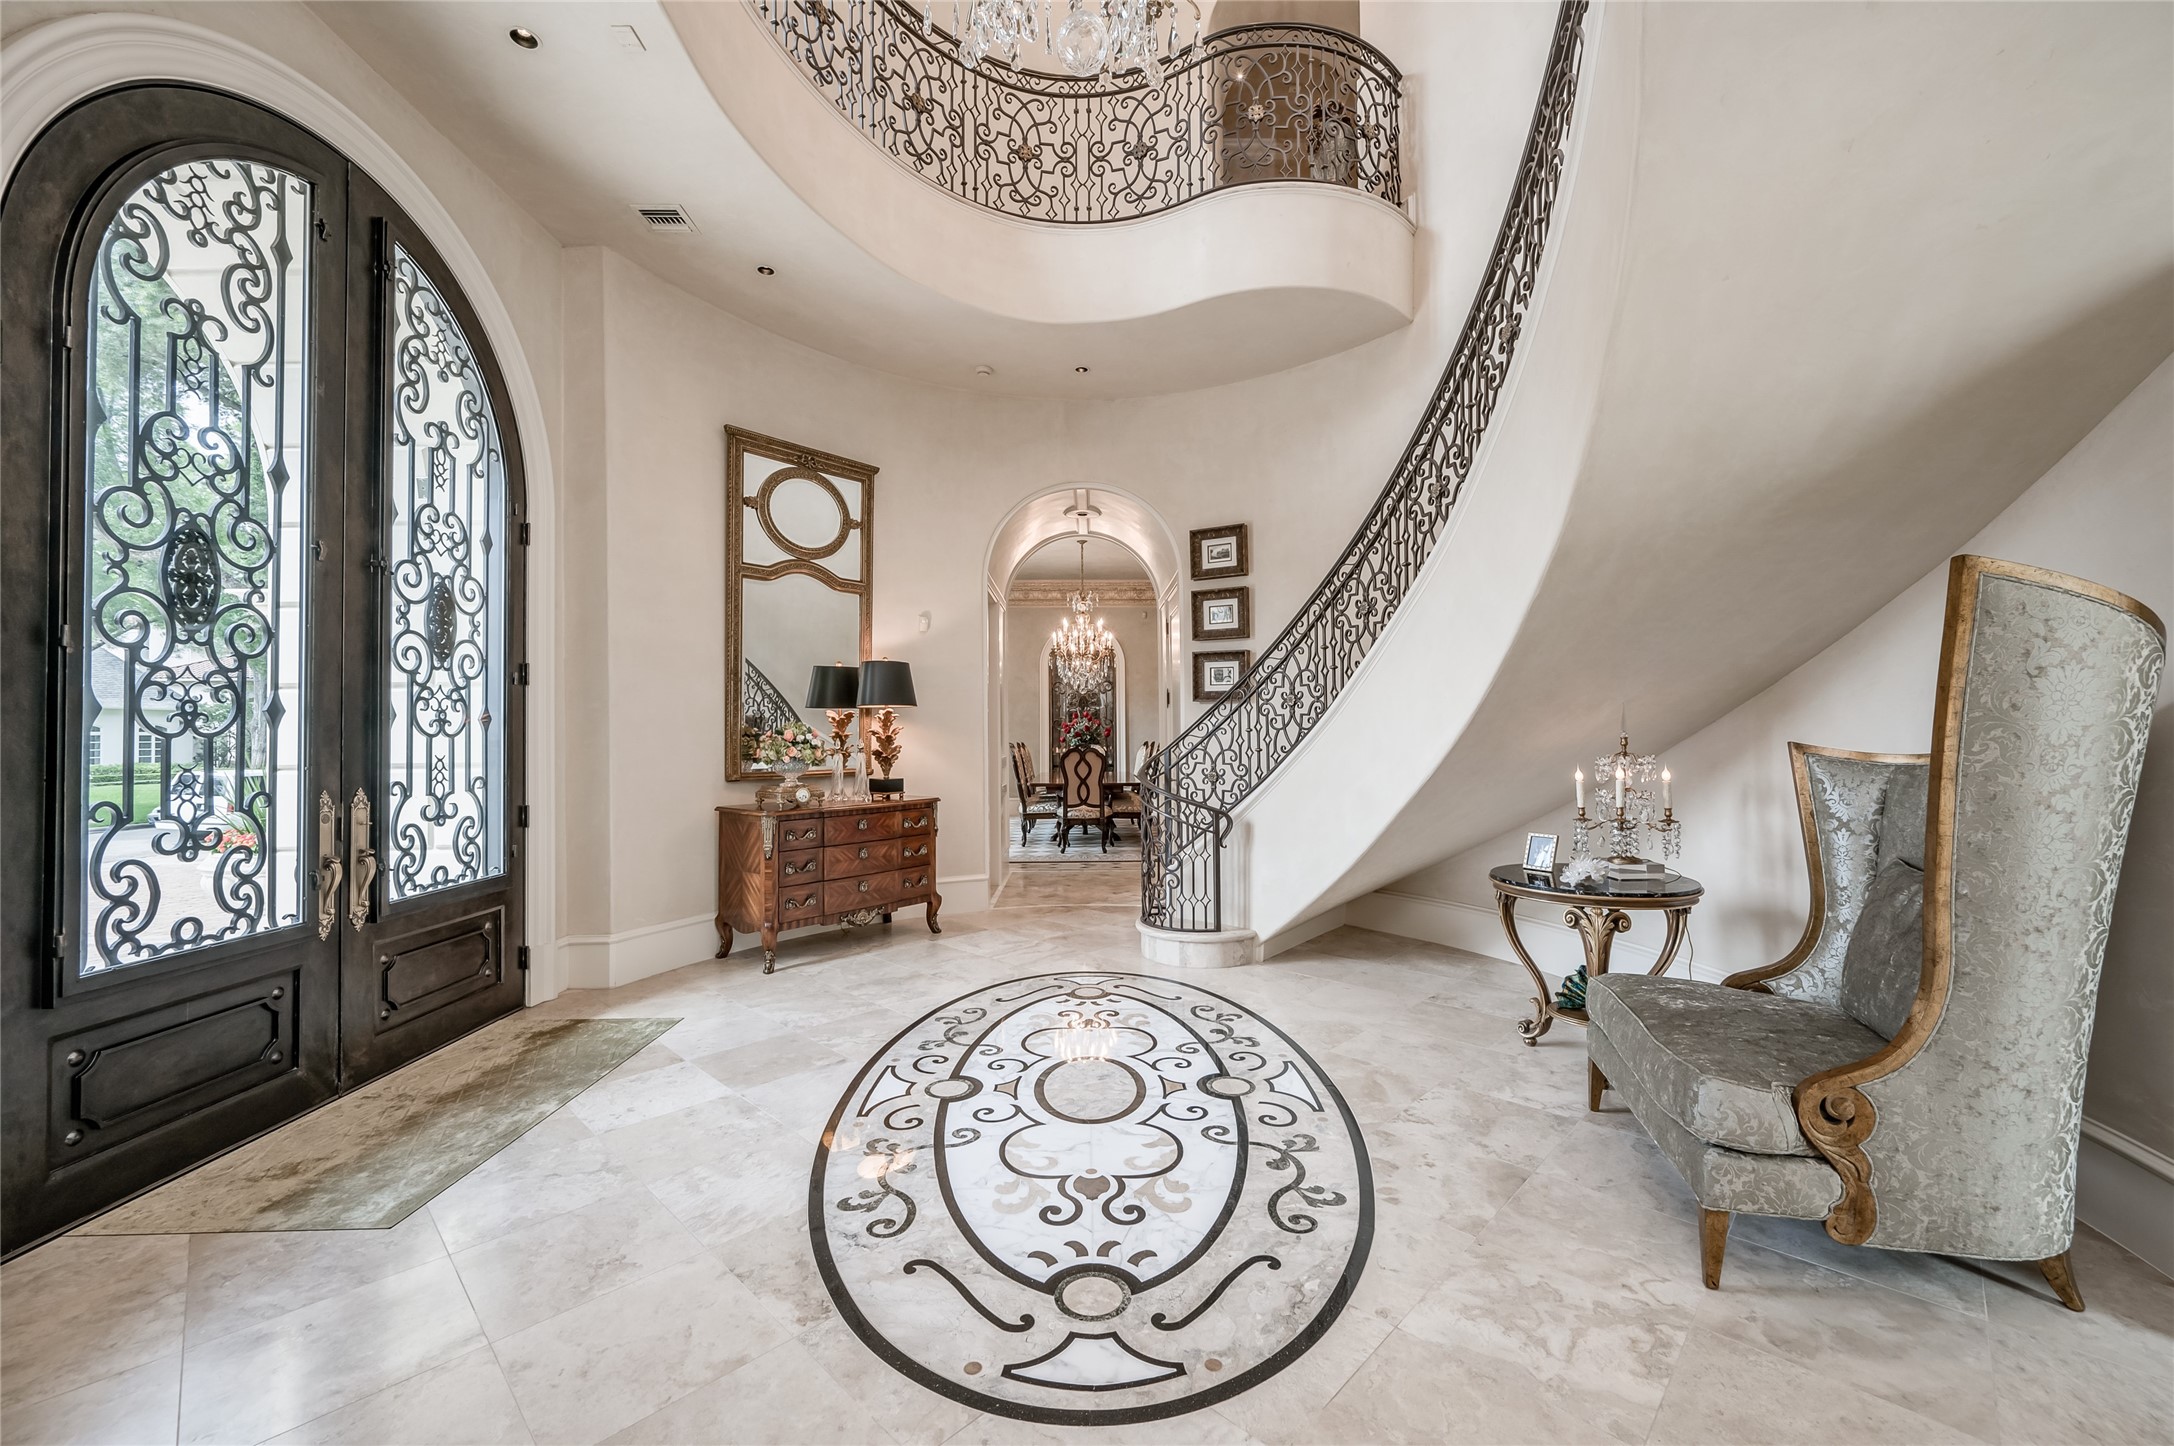 [Foyer]
Imposing iron and glass front doors open into the double-height, rotunda foyer, enhanced by a faux gilt domed ceiling and inlaid marble floor.